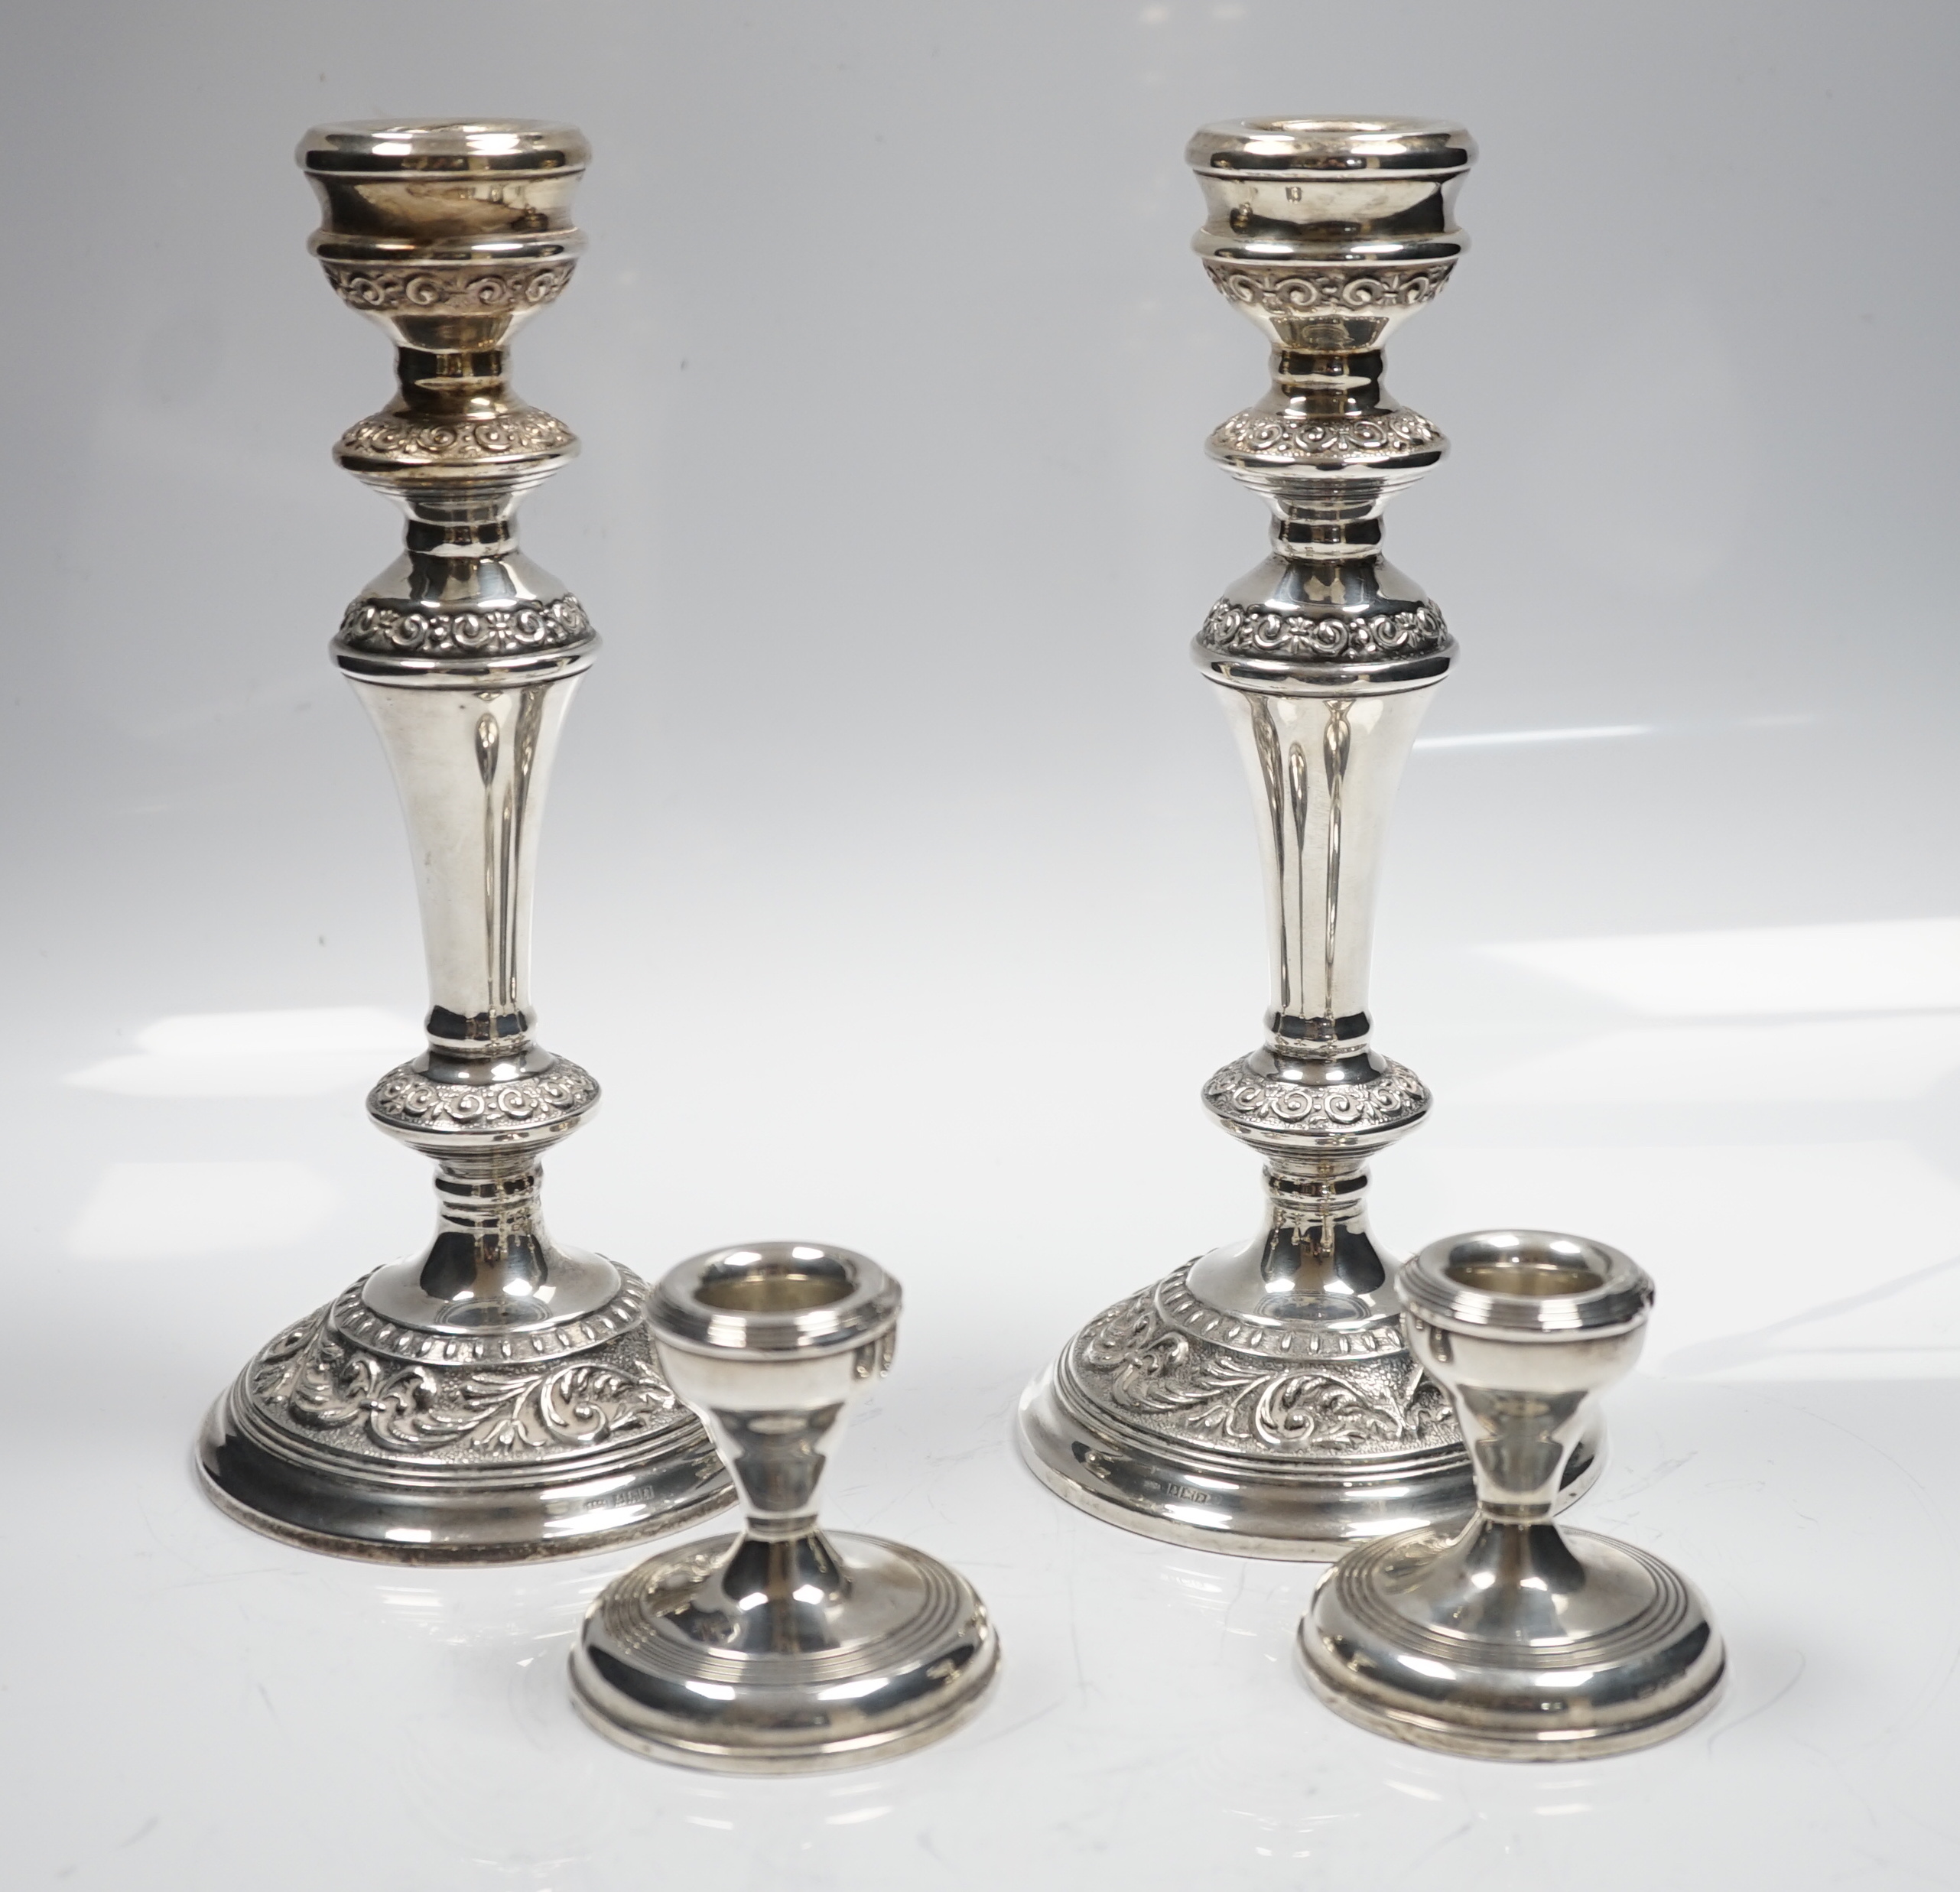 A modern pair of silver mounted candlesticks, Broadway & Co, Birmingham, 1991, 22.23cm and a pair of silver mounted dwarf candlesticks.